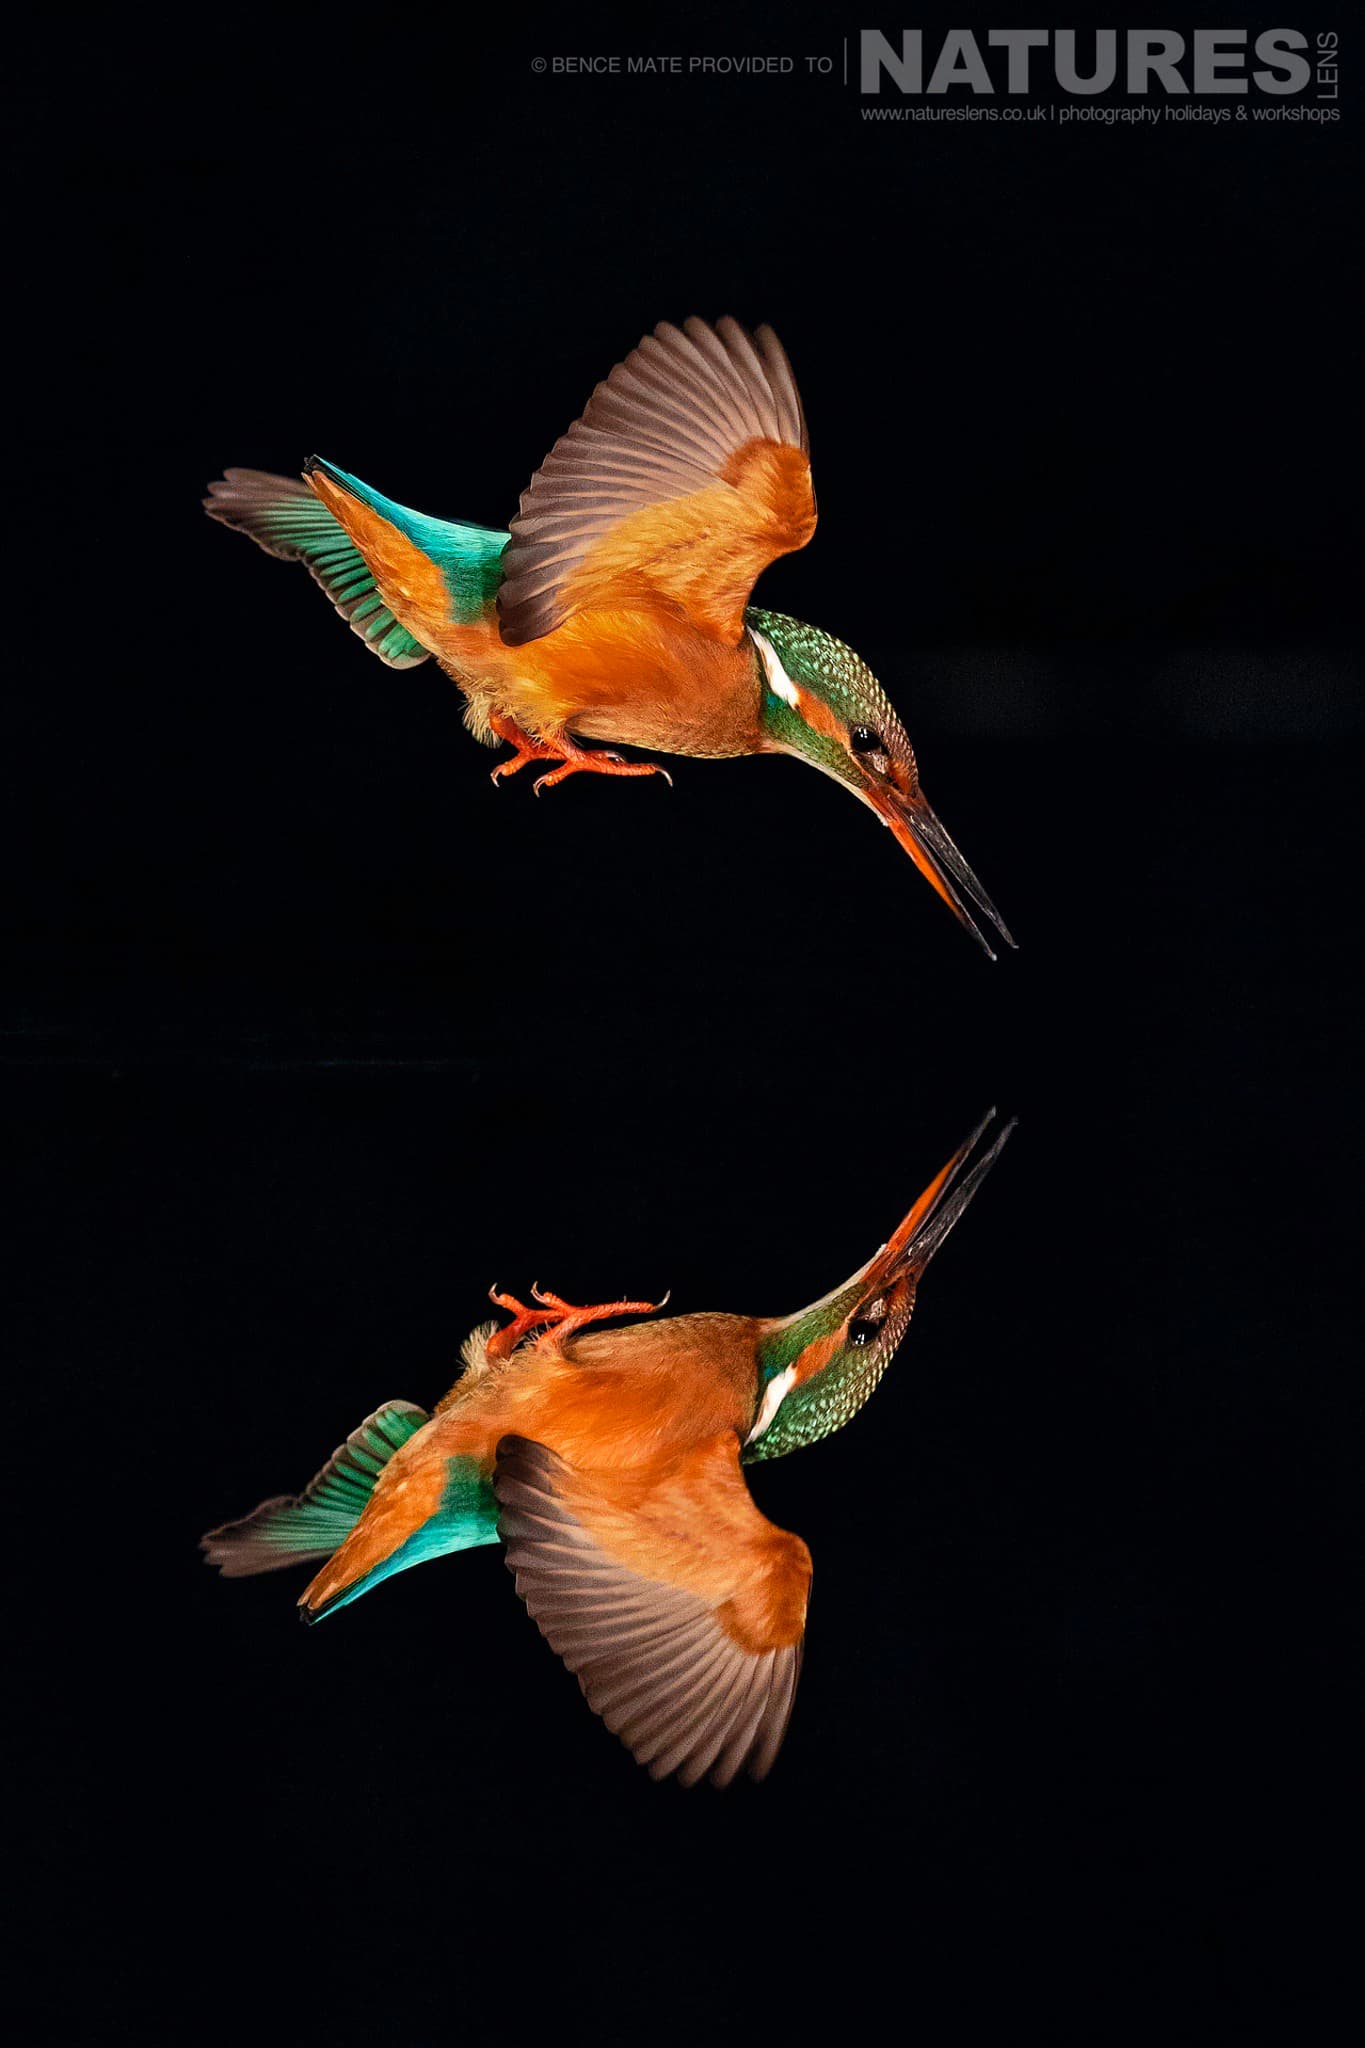 A diving kingfisher at Bence Máté's Photography Hides during the Hungarian Winter